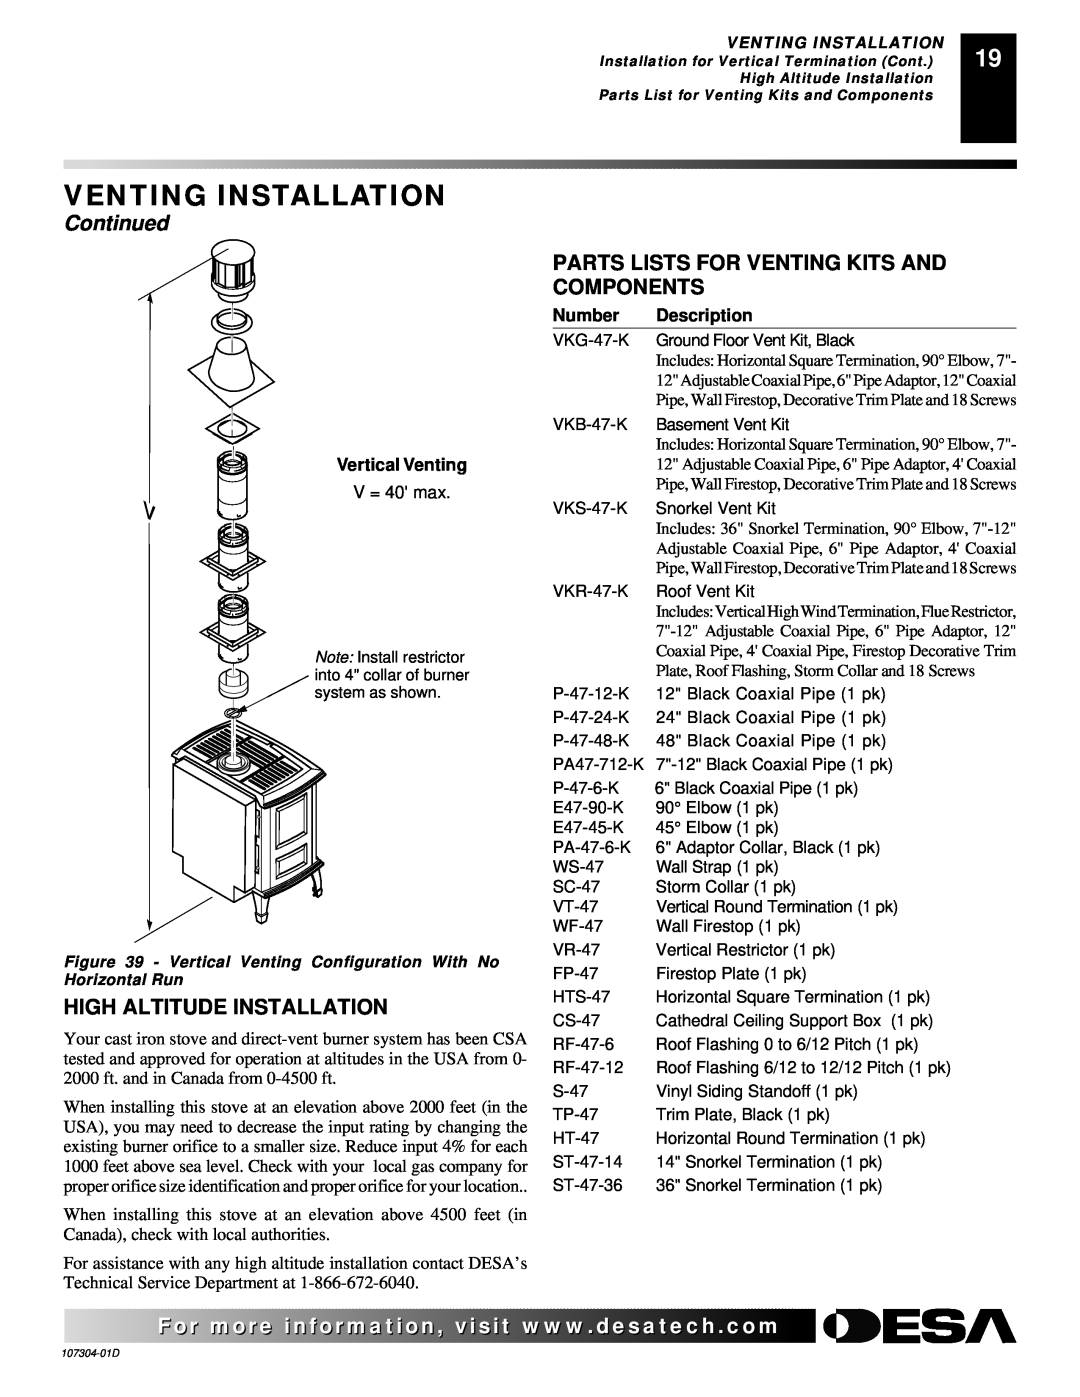 Desa SDVBNC High Altitude Installation, Parts Lists For Venting Kits And Components, Venting Installation, Continued 